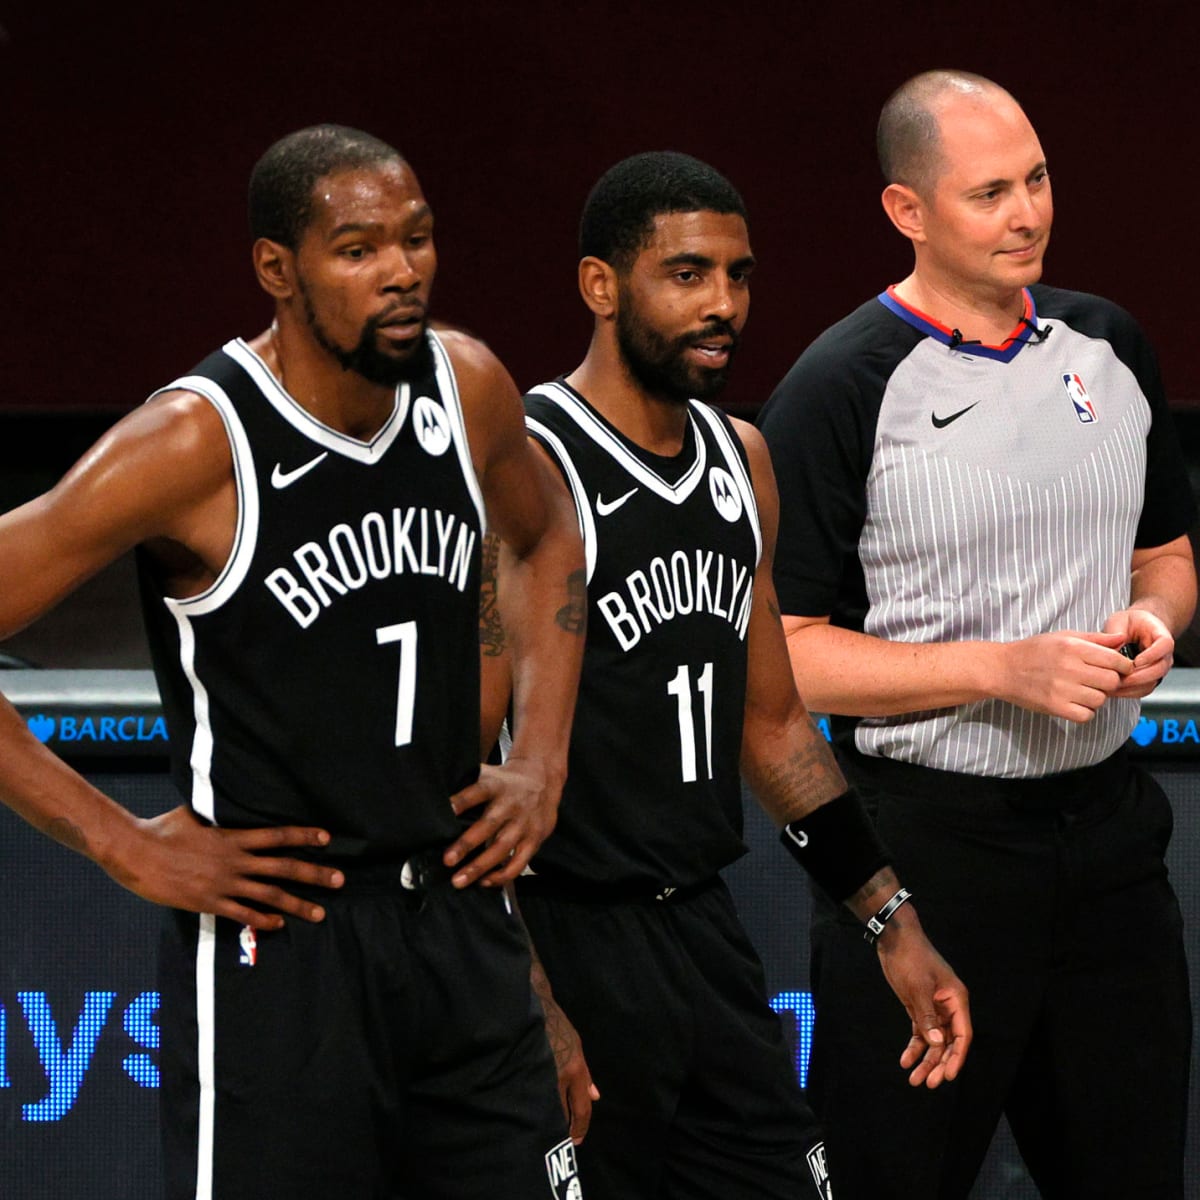 Kevin Durant & Kyrie Irving Brooklyn Nets Jerseys (2019)